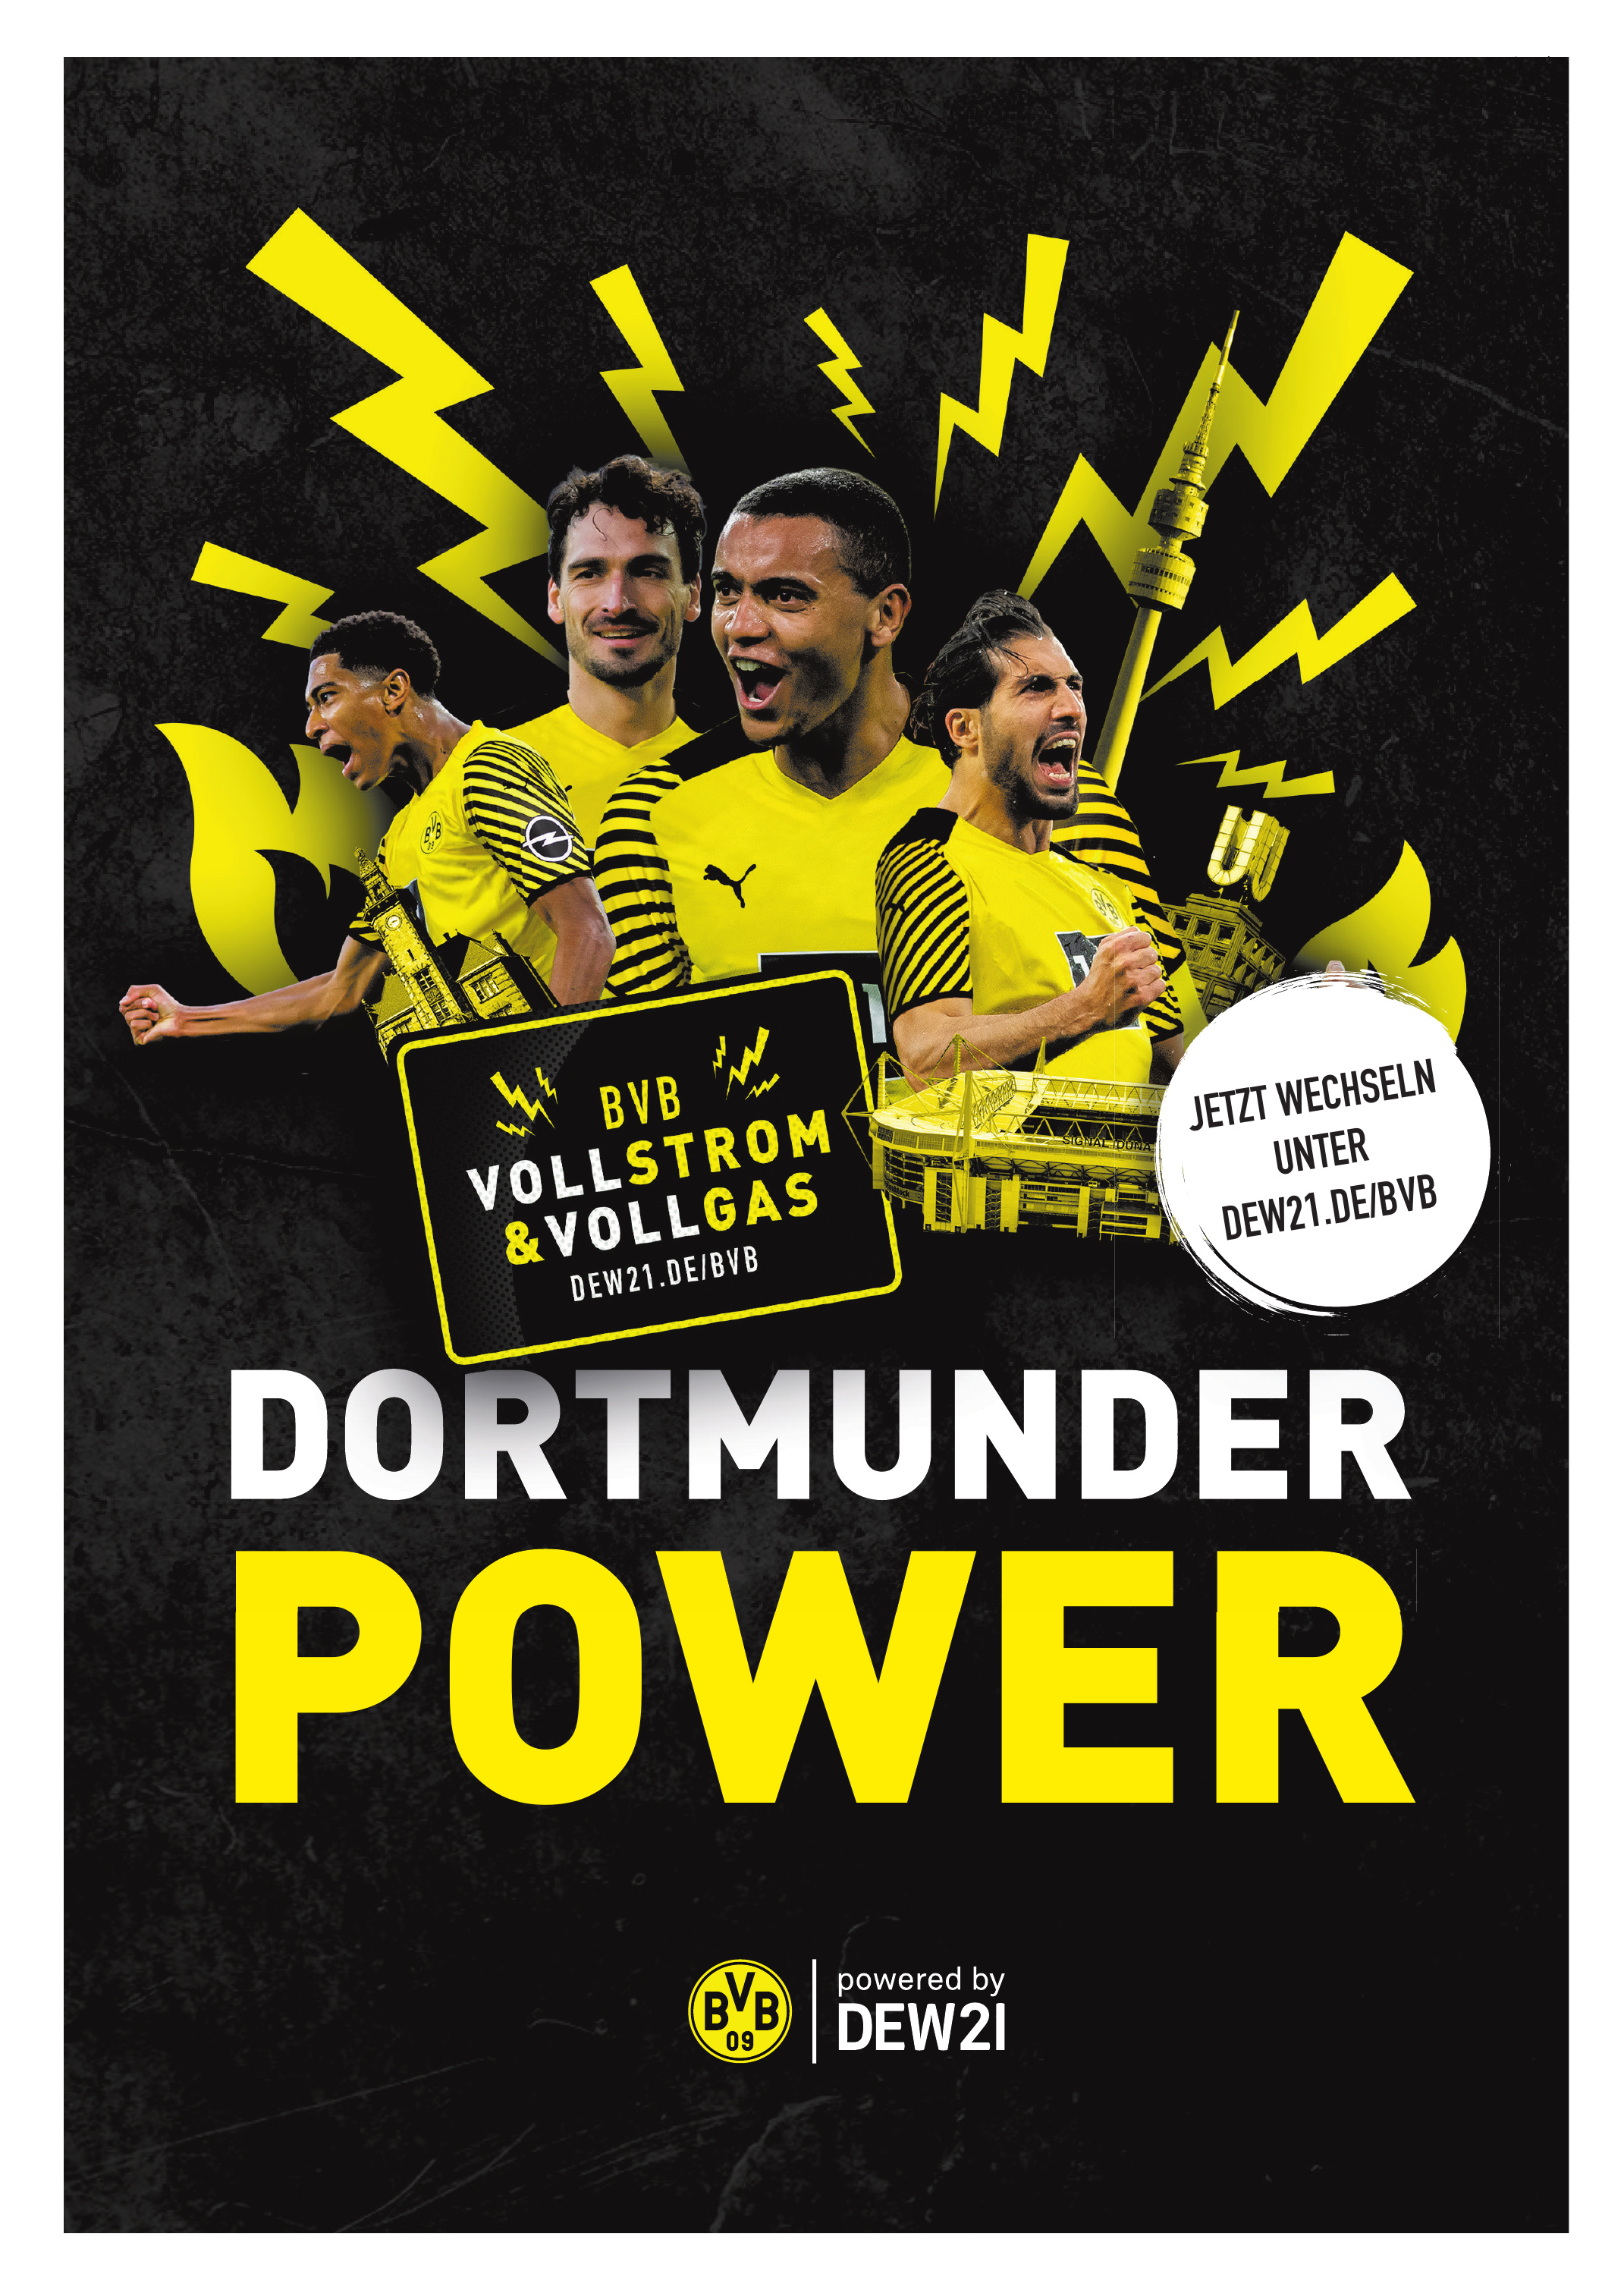 BVB powered by DEW21